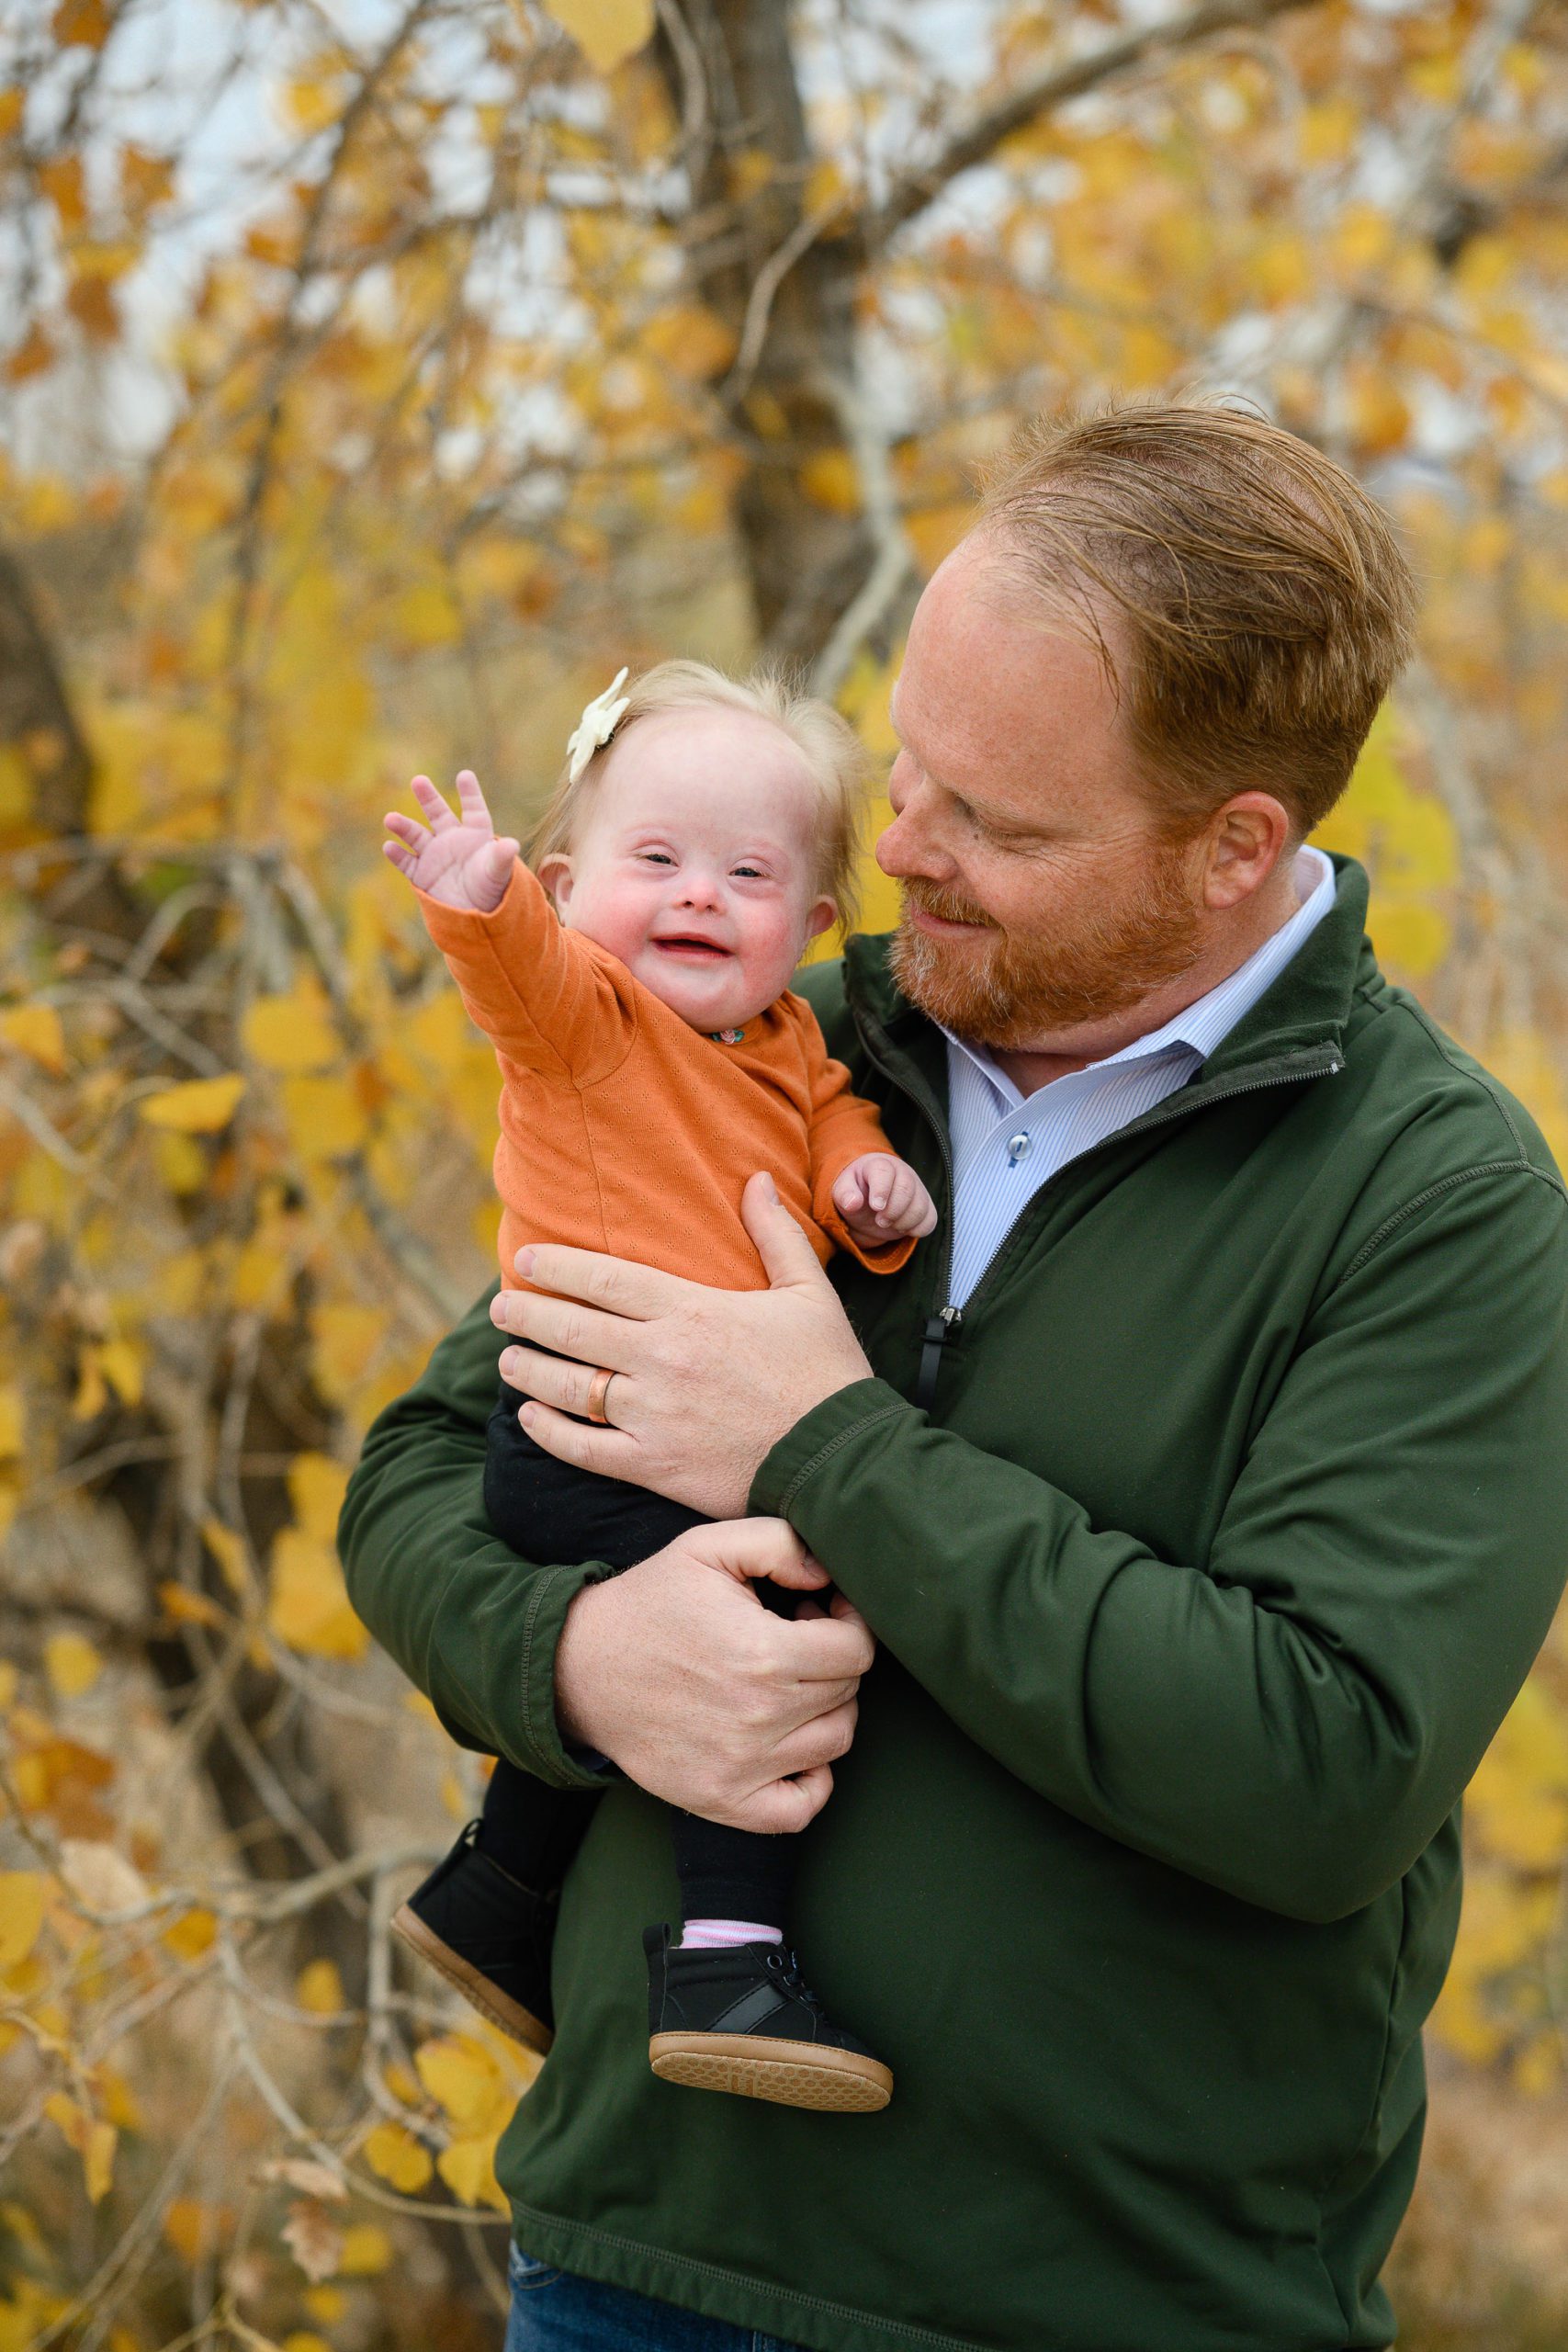 A Denver Photographer catches a little girl with down syndrome in a bright orange shirt smiling and waving at the camera while her dad in a green sweater is holding her and smiling at her.